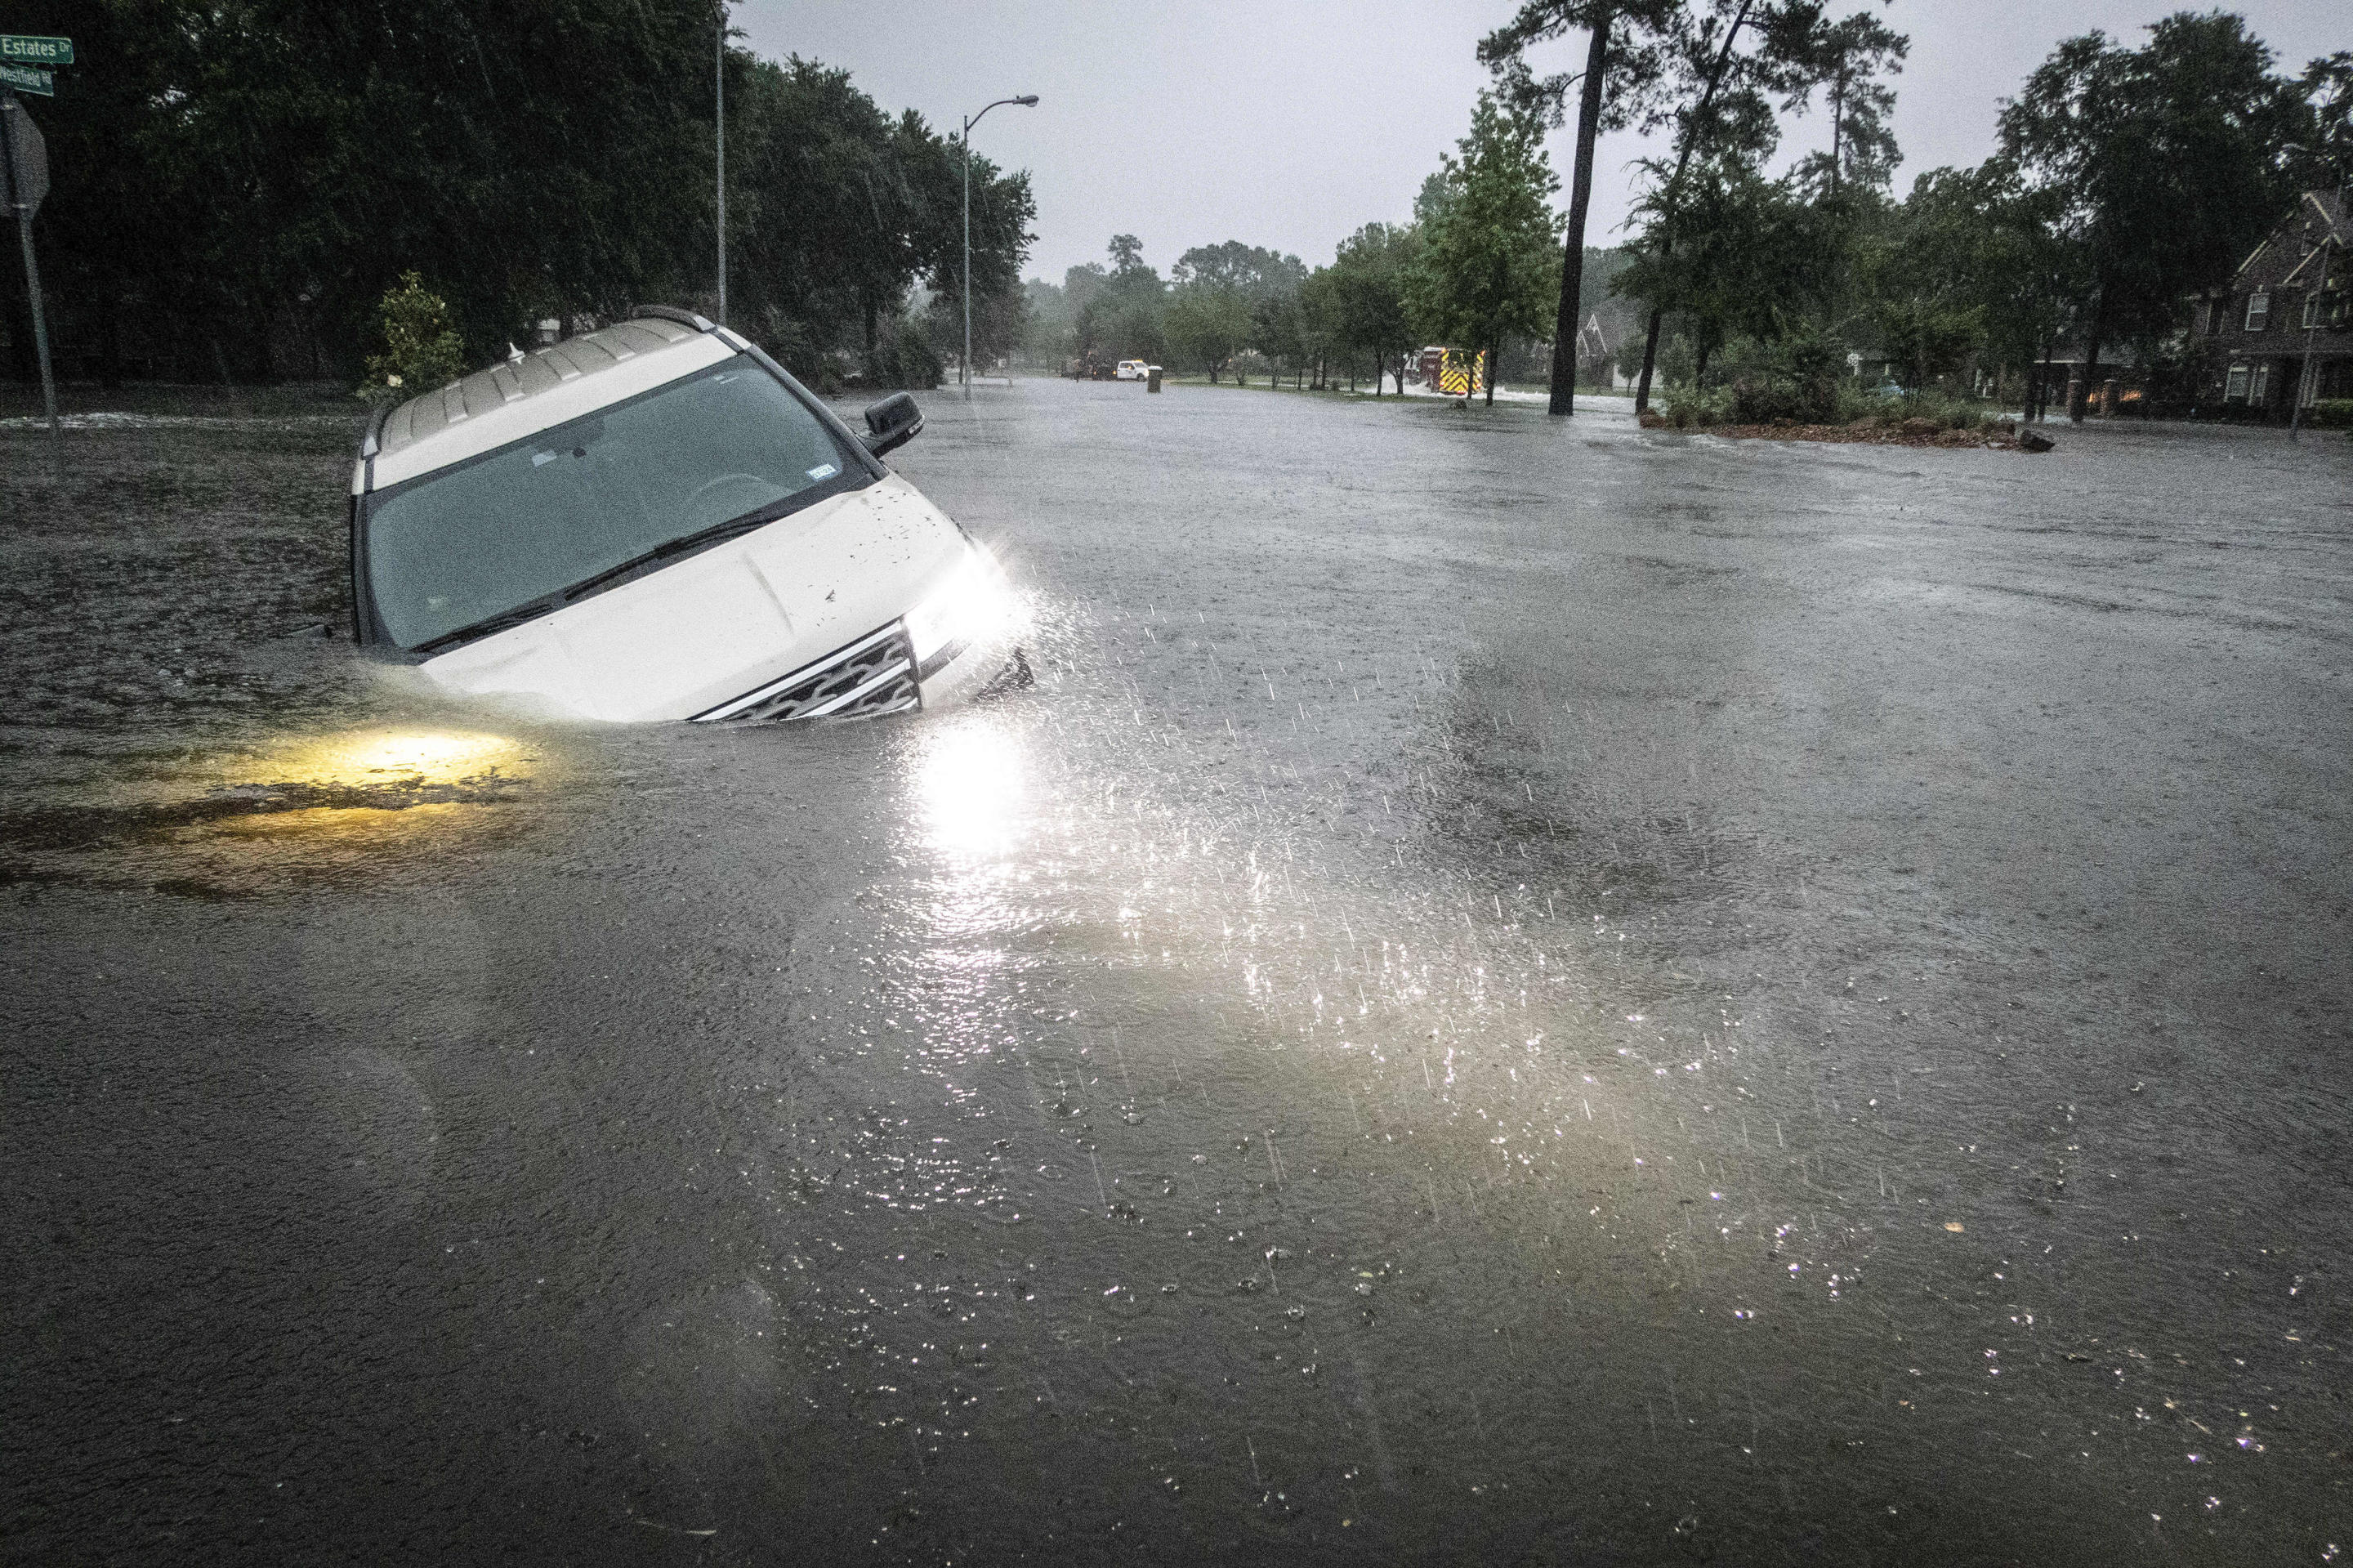 An SUV is stranded in a flooded ditch.